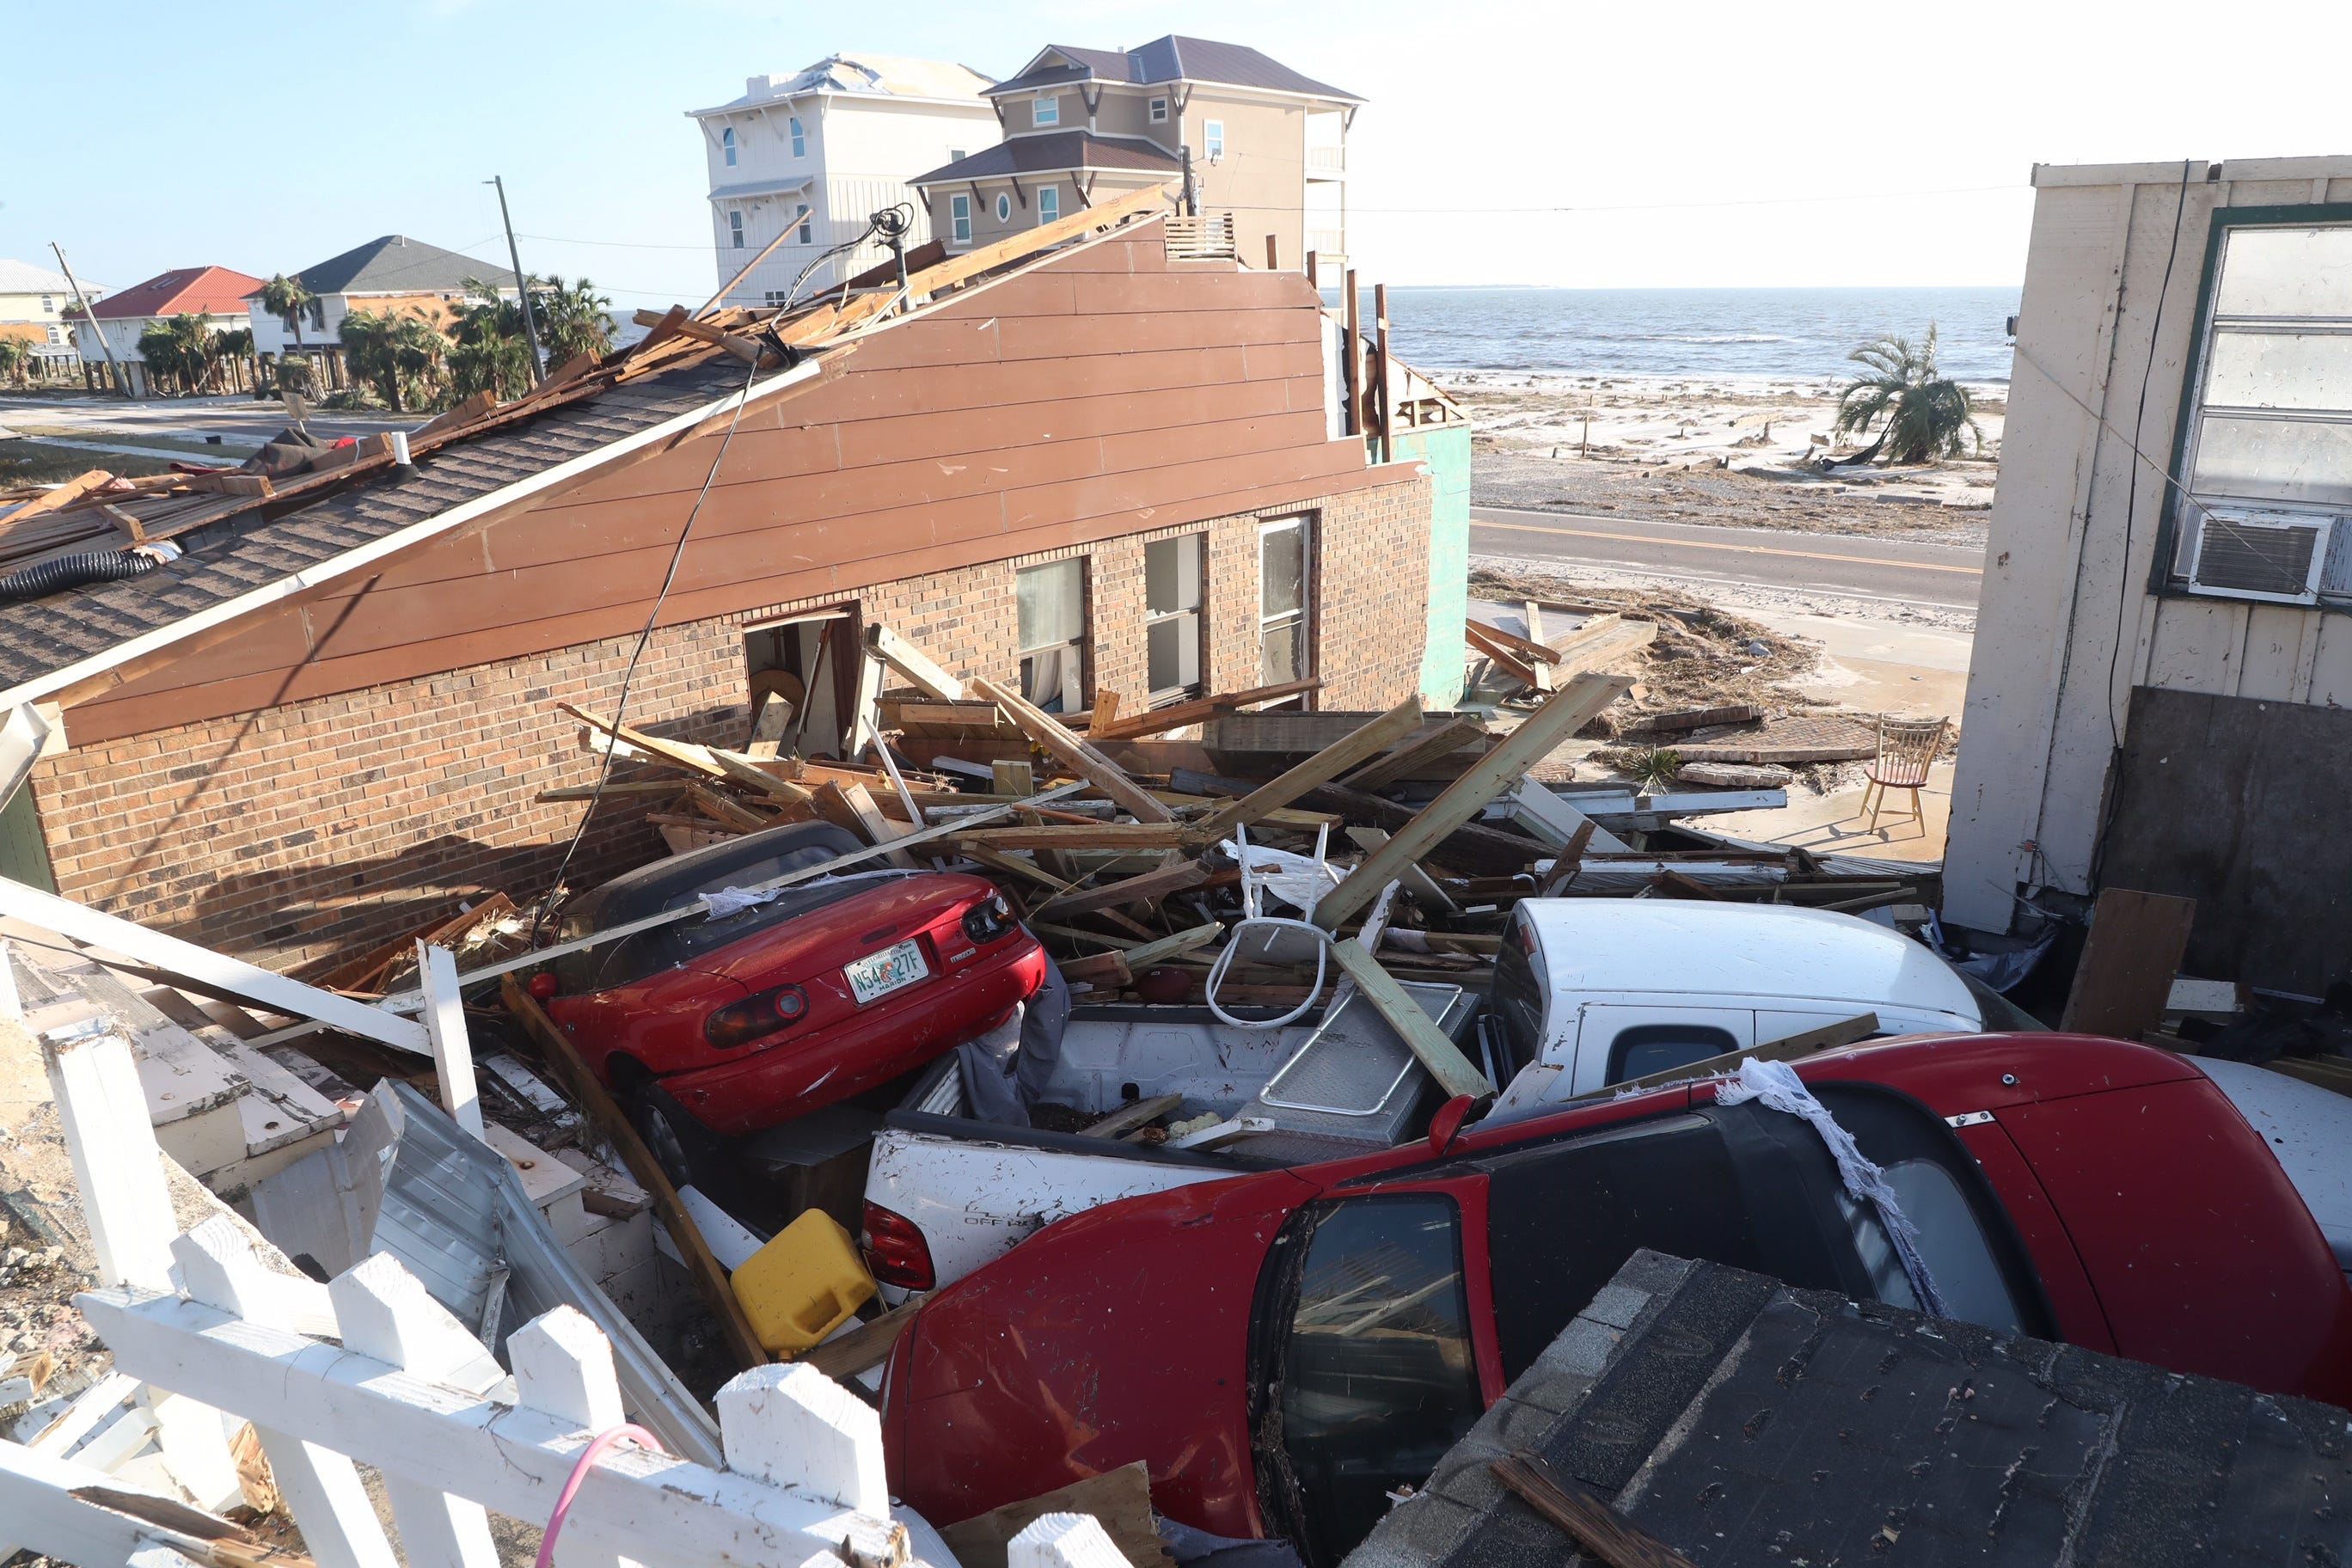 Damaged homes and cars in Beacon Hill, Fla. — just south of Mexico City where Hurricane Michael made landfall.